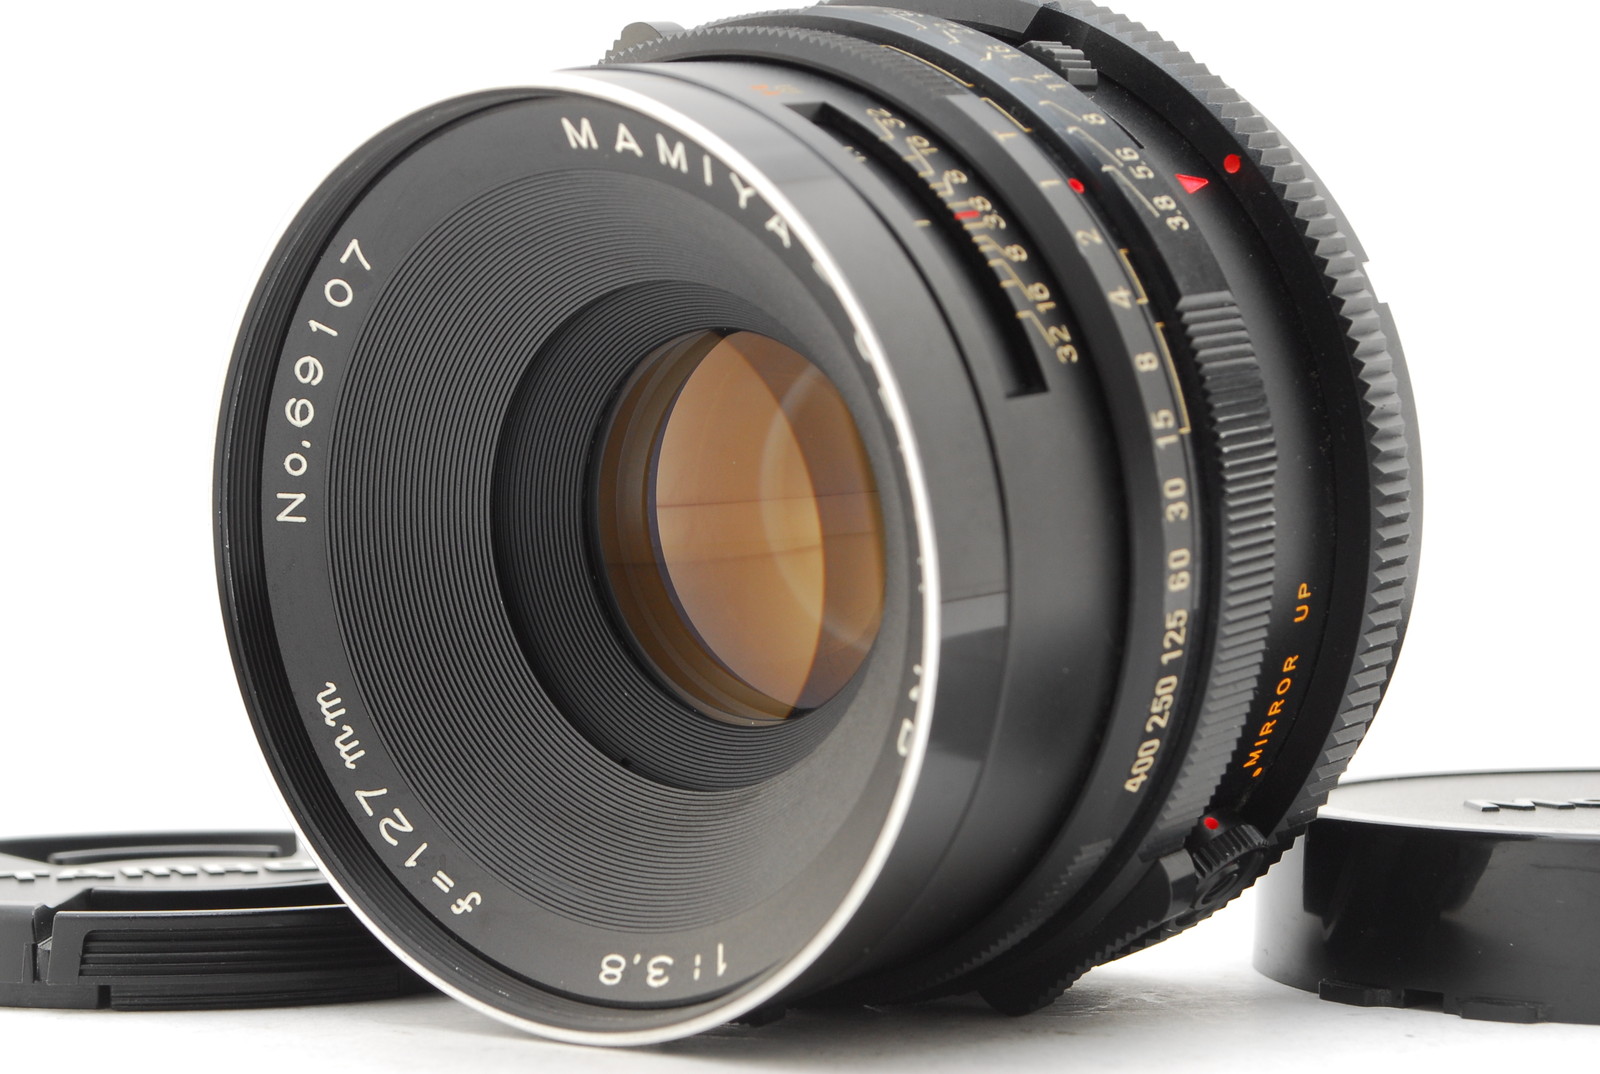 PROMOTION. EXC++++ MAMIYA Sekor NB 127mm f/3.8 for RB67 Pro S SD, Front Cap, Rear Cap from Japan